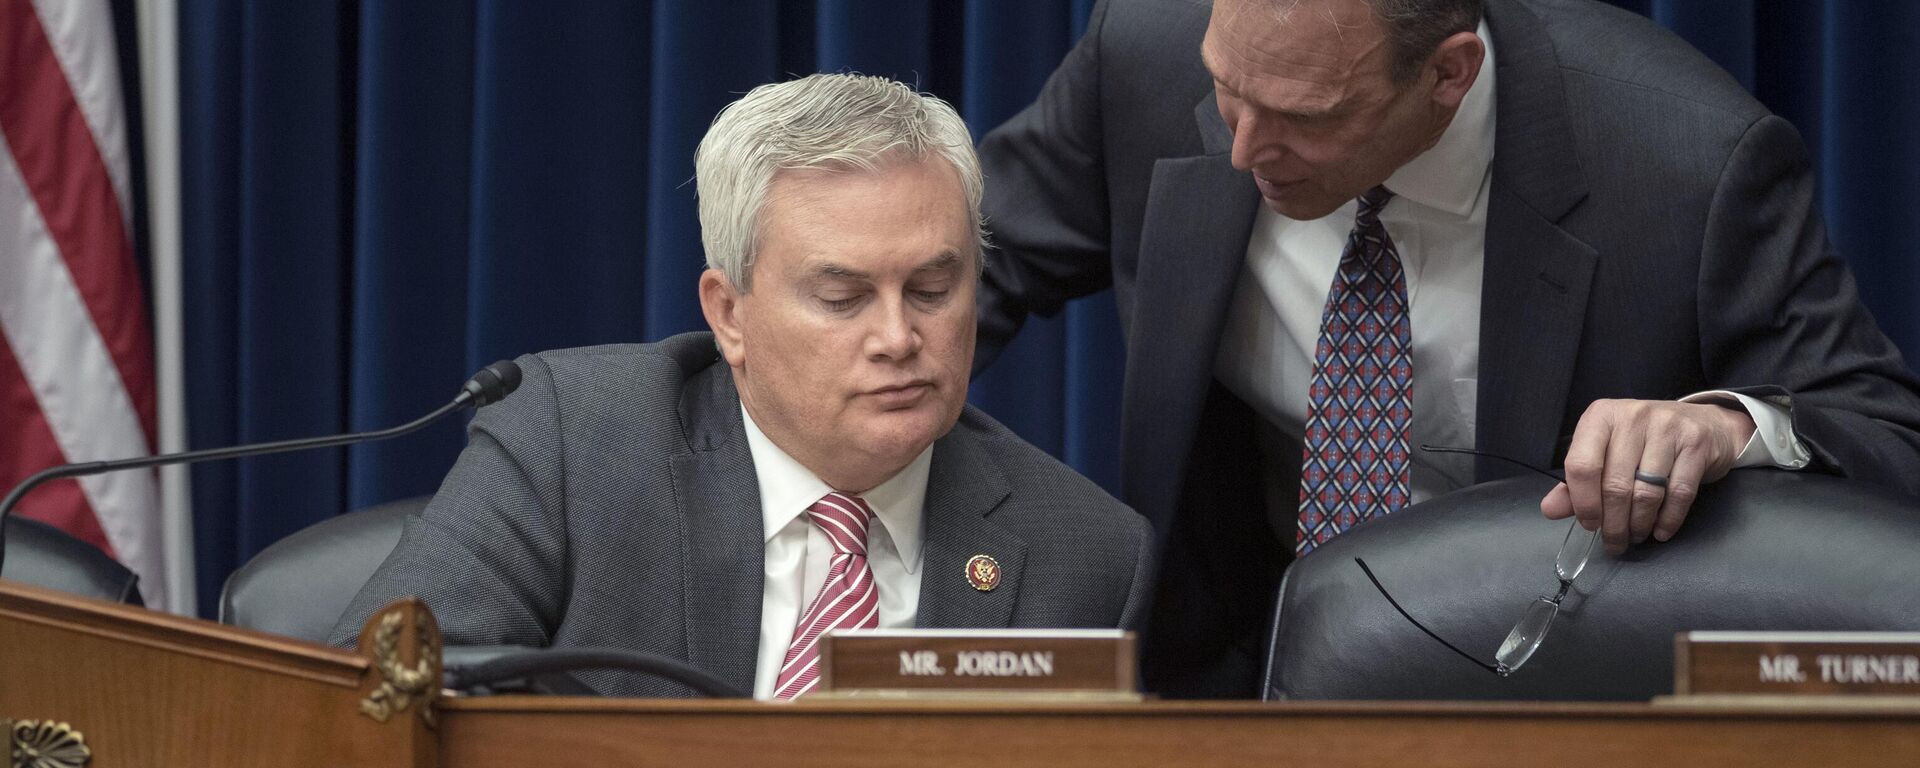 House Oversight and Accountability Committee Chairman James Comer, R-Ky., left, talks with Rep. Scott Perry, R-Pa., during the House Oversight and Accountability Committee's hearing about Congressional oversight of Washington, D.C., in Washington, Wednesday, March 29, 2023. - Sputnik International, 1920, 09.05.2023